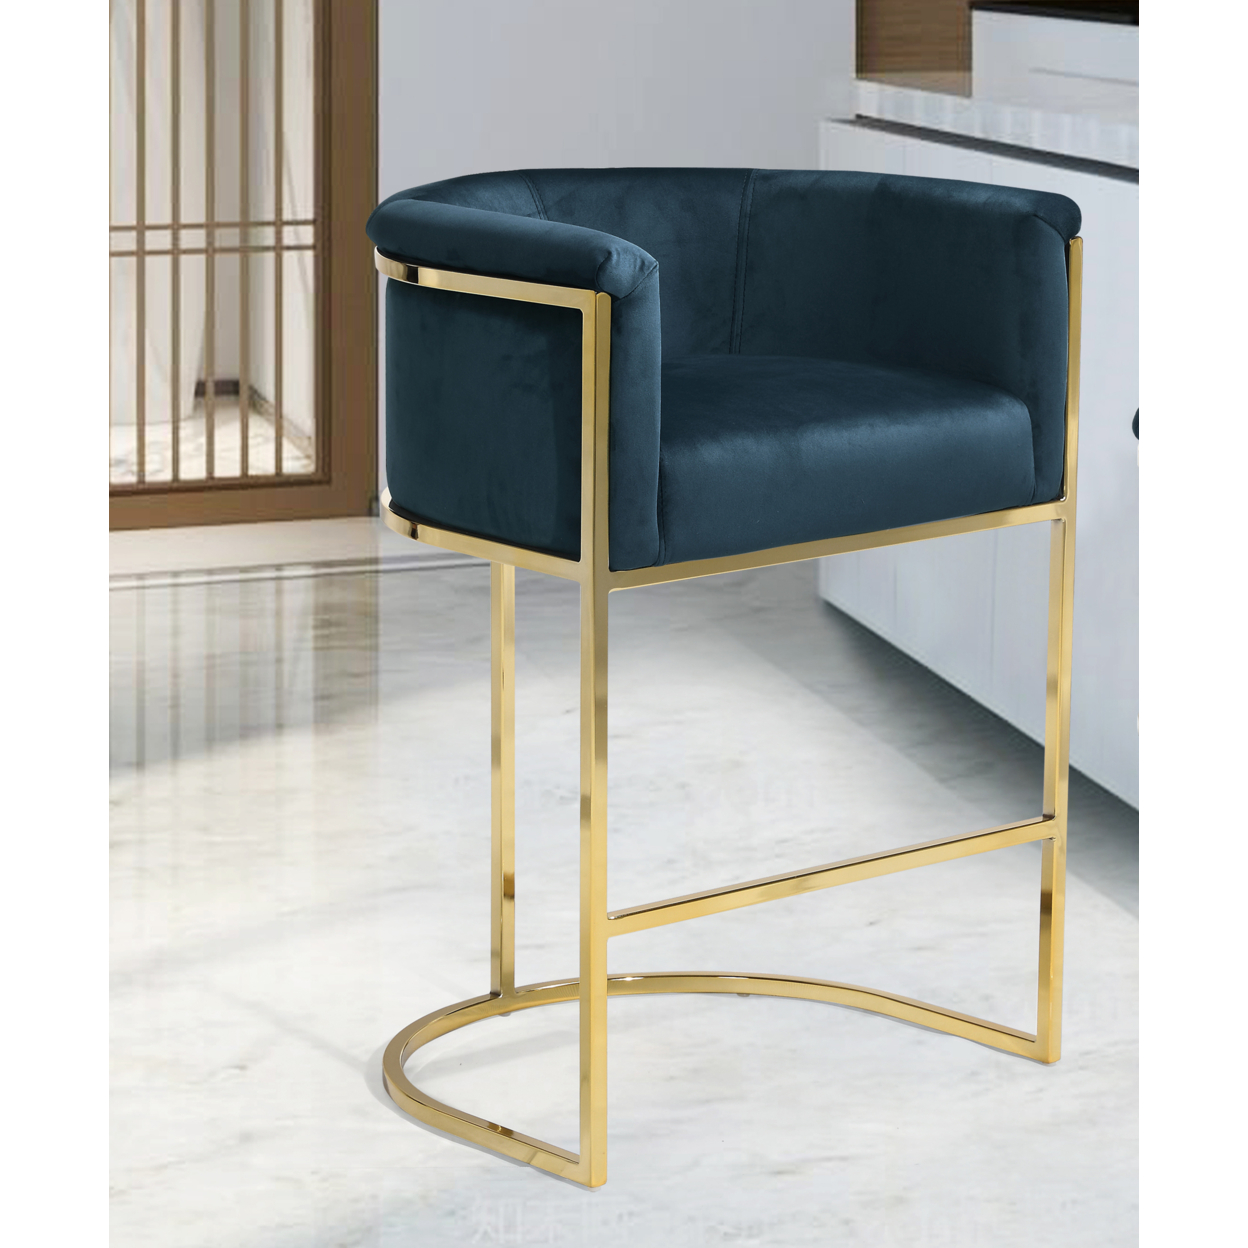 Iconic Home Scout Counter Stool Chair Velvet Upholstered Rolled Shelter Arm Design Half-Moon Goldtone Solid Metal U-Shaped Base - Teal